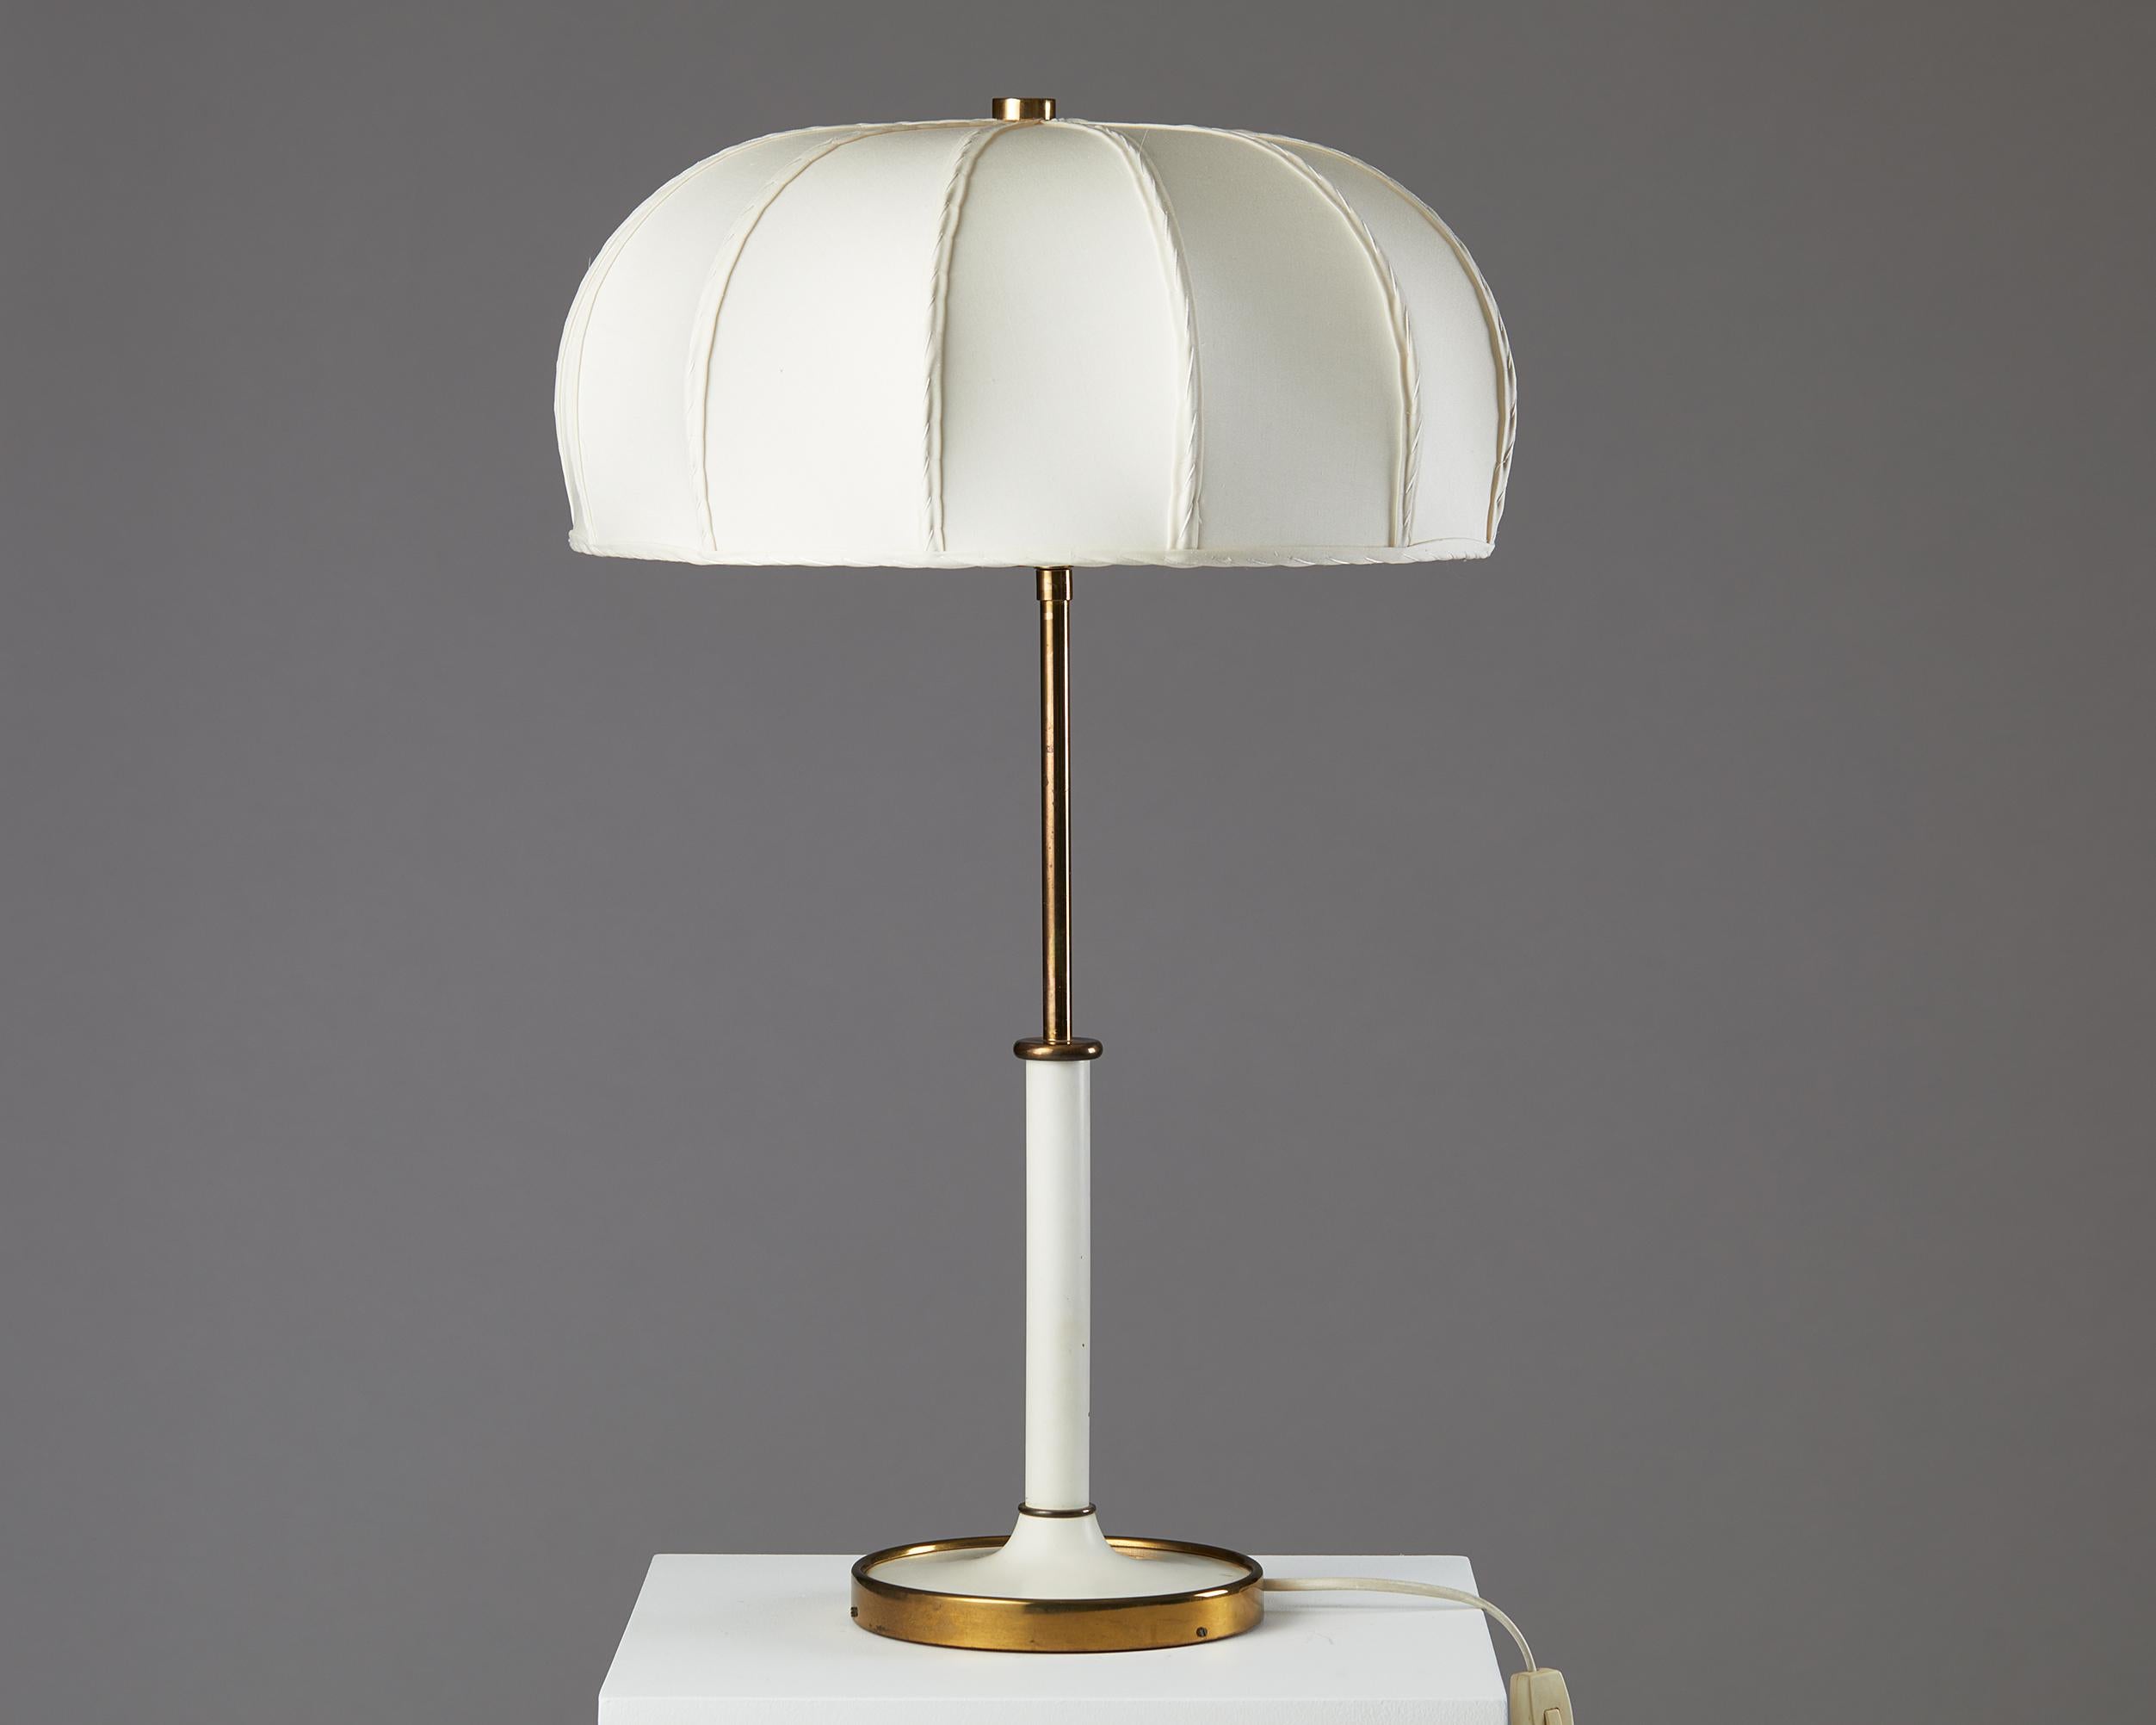 Table lamp model 2466 designed by Josef Frank for Svenskt Tenn,
Sweden. 1950s.
Brass and silk shade.

An understated and timeless design, the model 2466 by Josef Frank is found in both a table lamp and floor lamp silhouette. The brass base